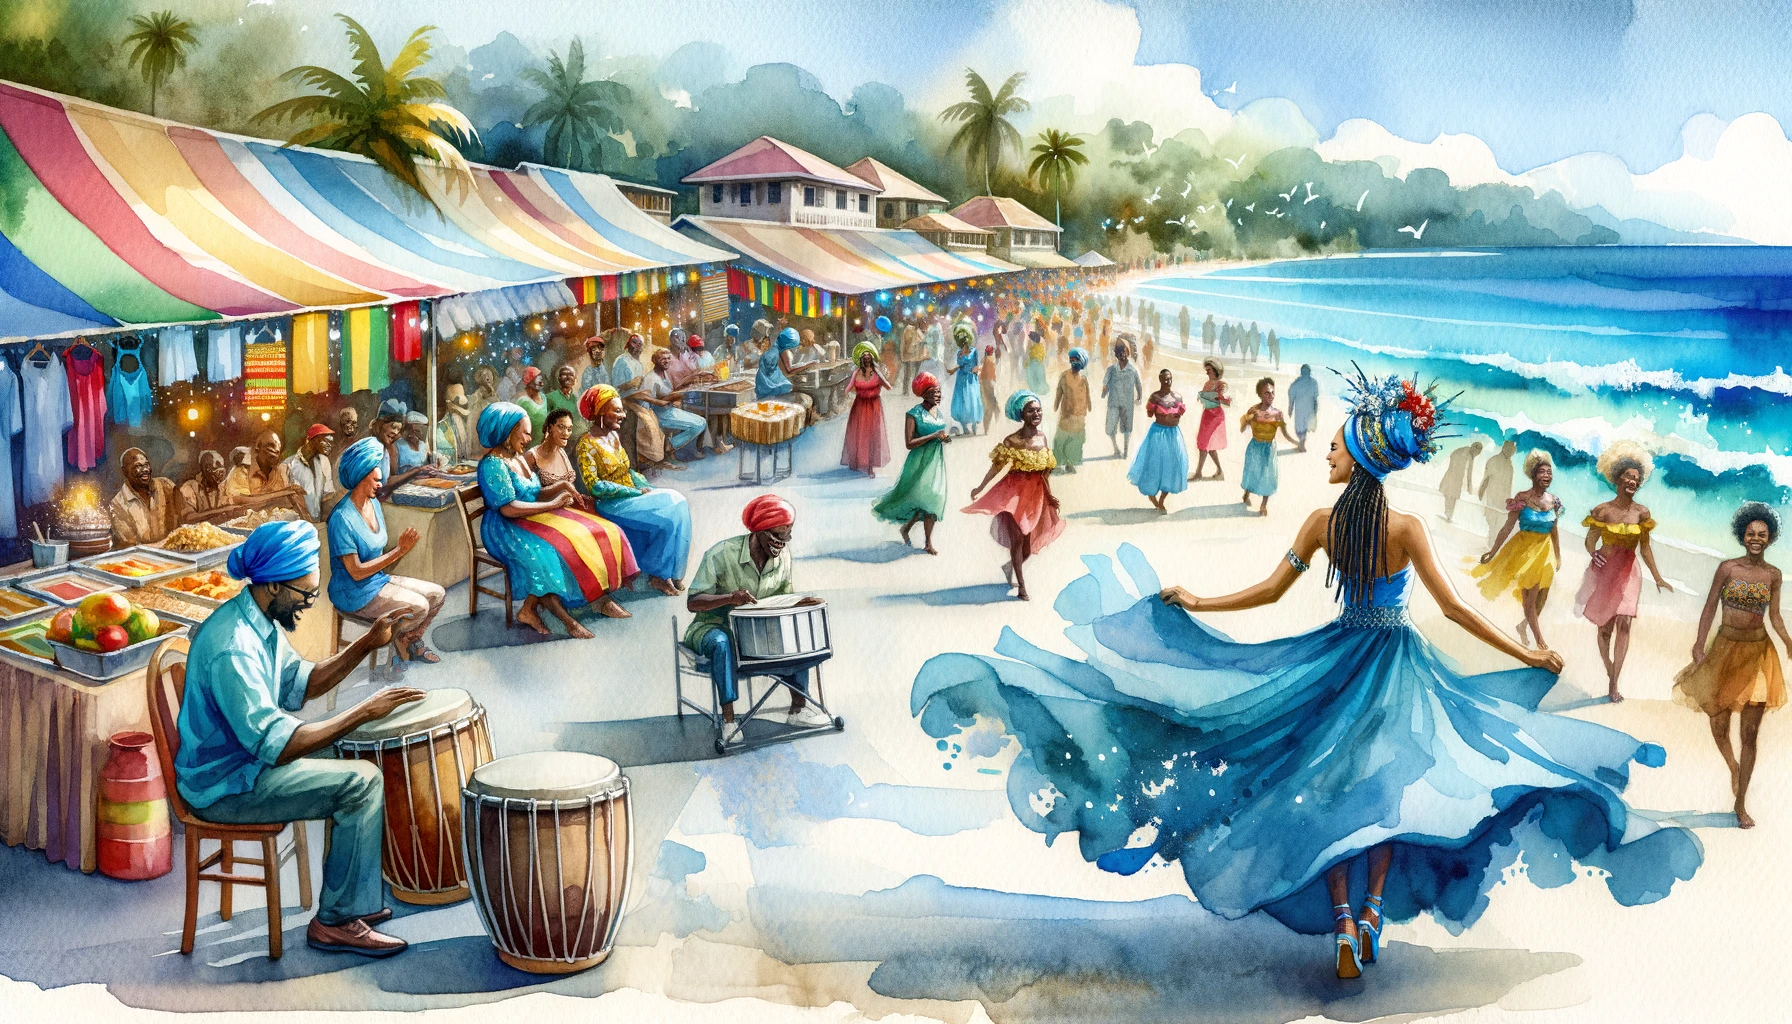 Local Culture and Traditions: Immersing Yourself in Negril